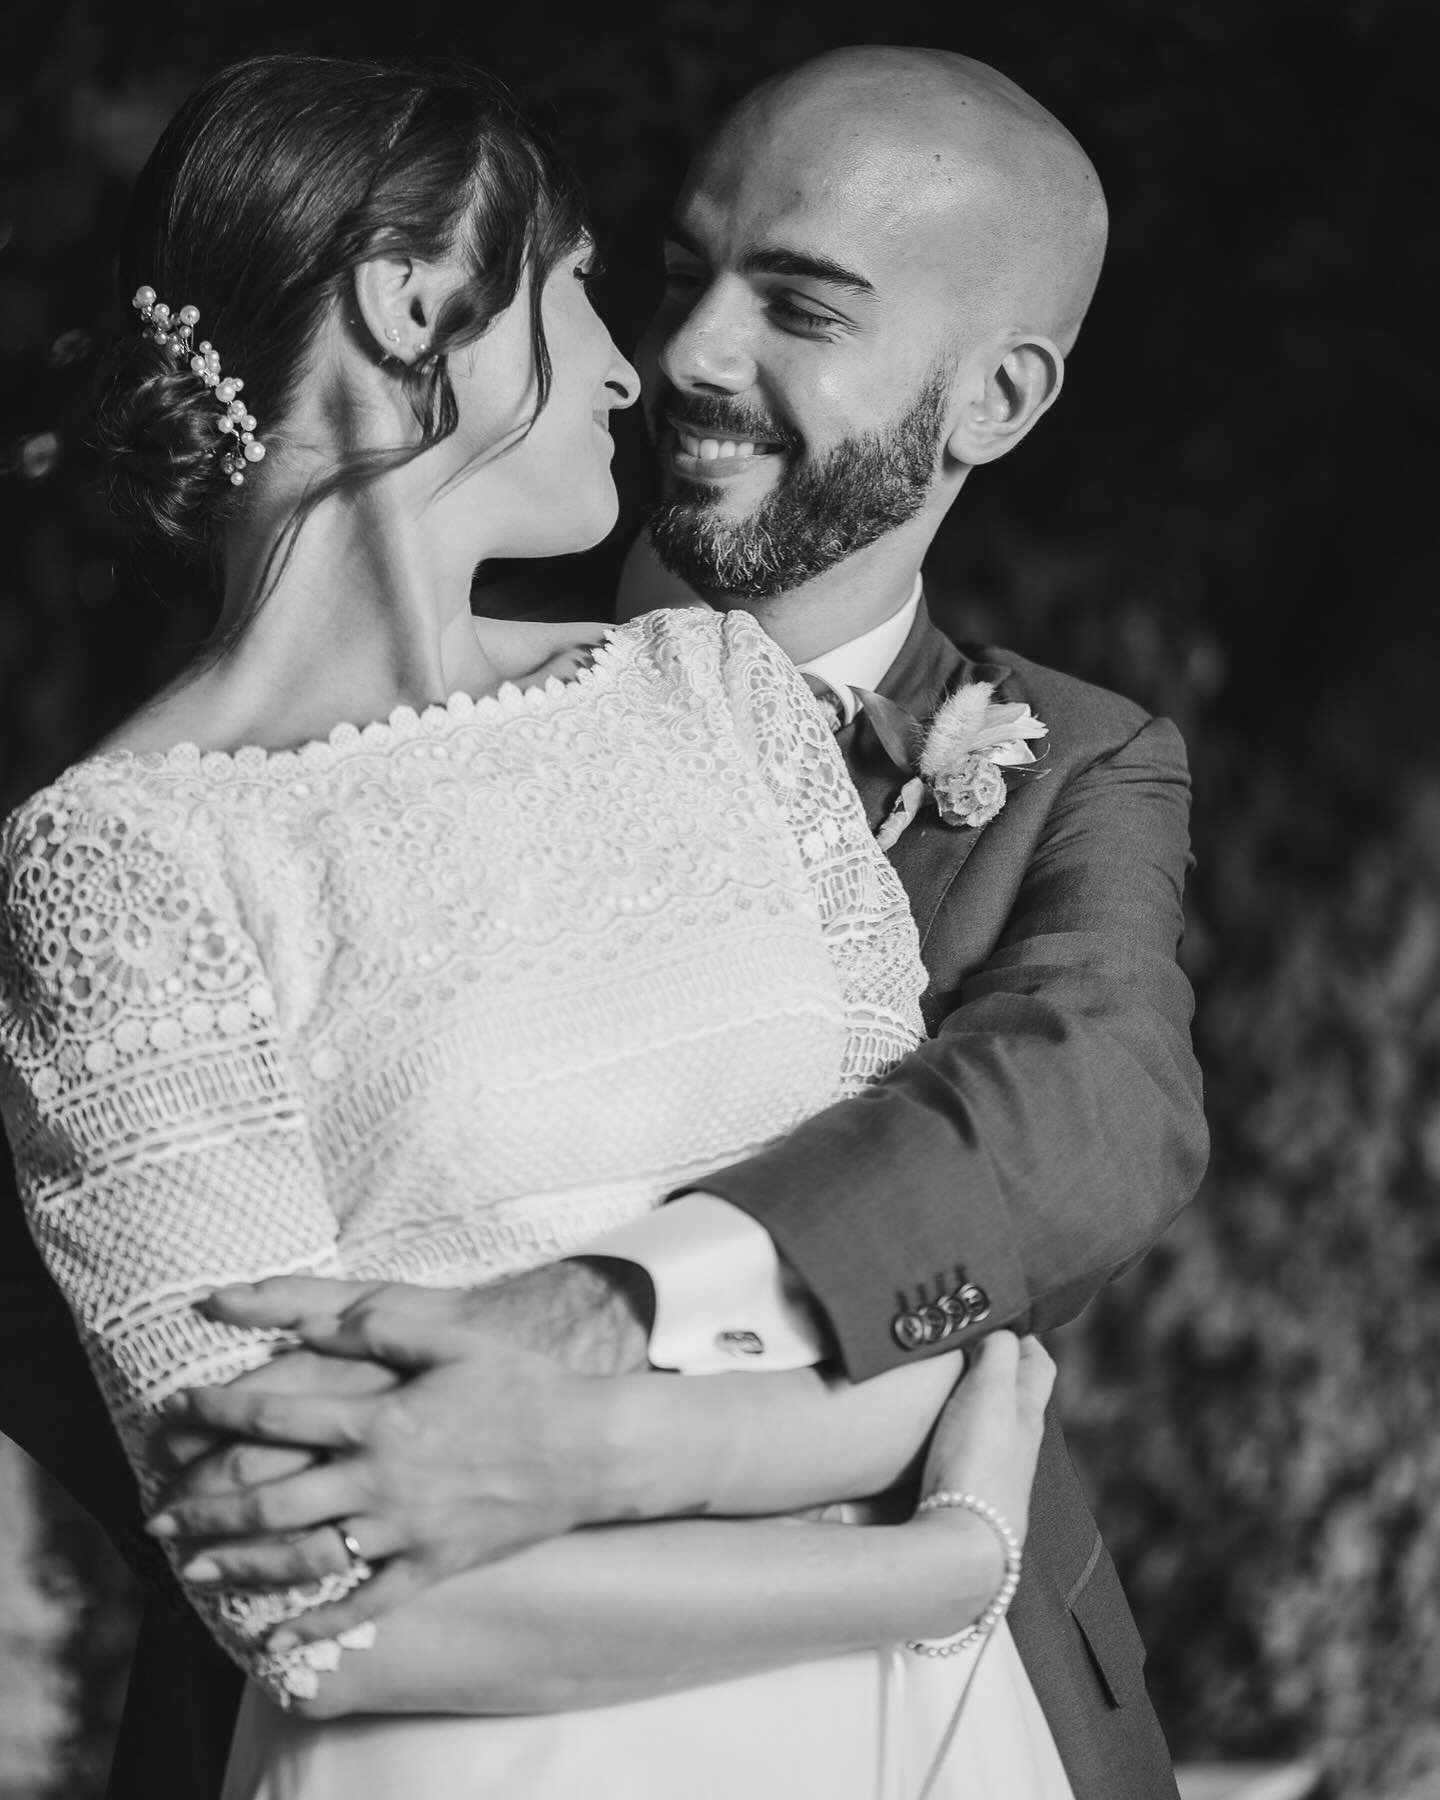 Michele &amp; Filippo in Fiesole. The love between these two made this a beautiful story to capture. 📷🫶🏼

#fiesole #fiesolewedding #florence #tuscany #italy #italyphotographer #italyweddingphotographer #florenceweddingphotographer #tuscanywedding 